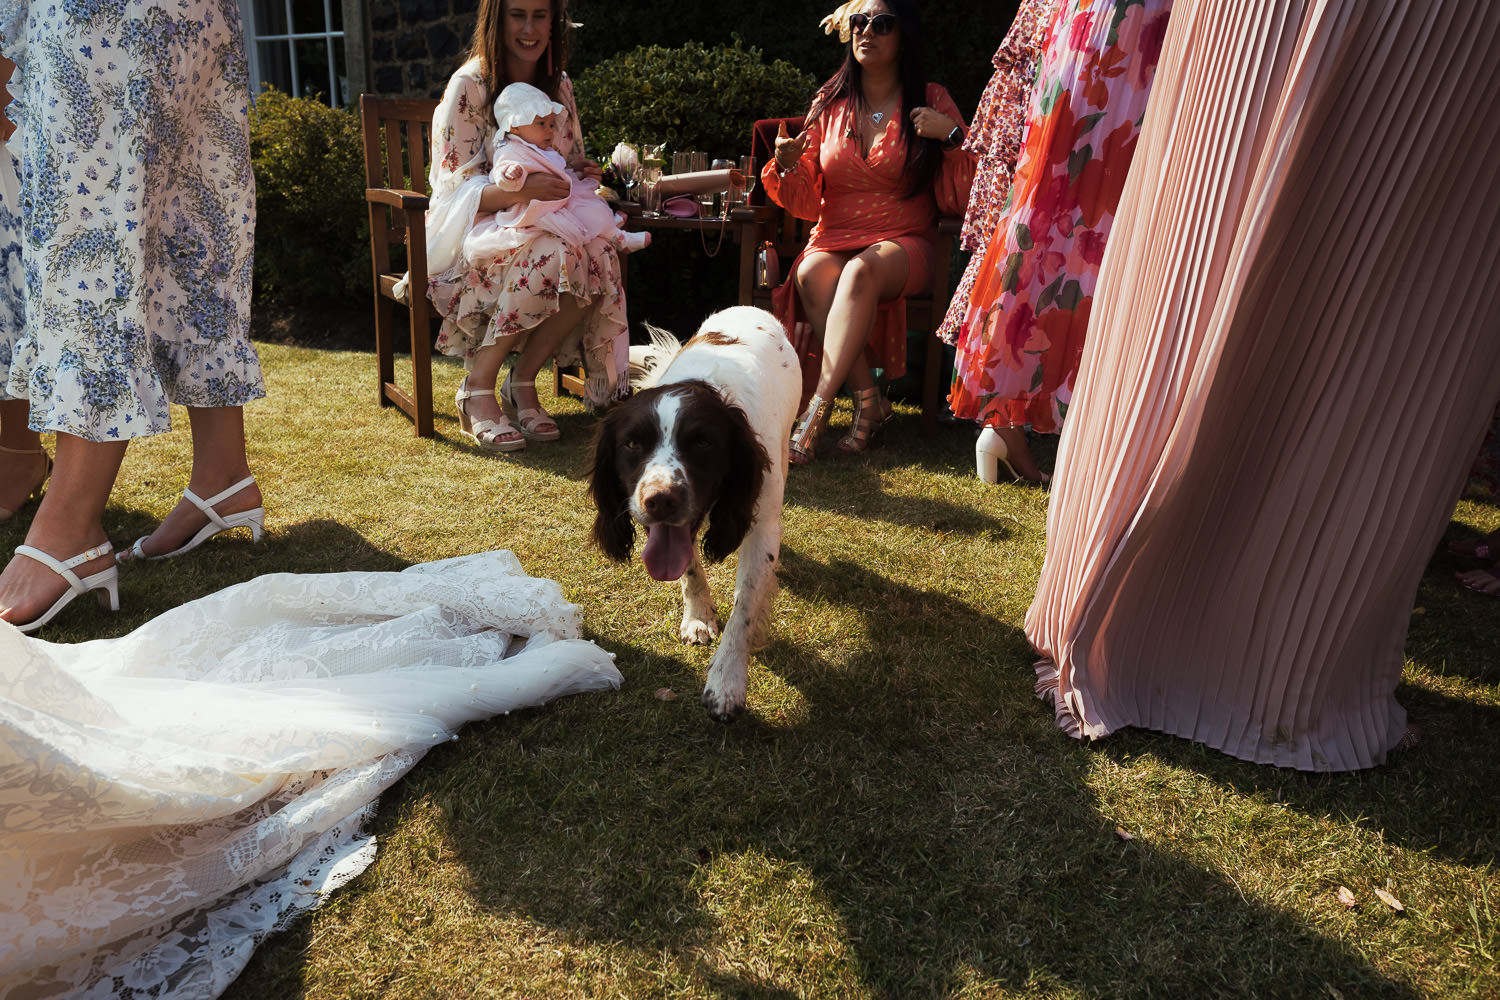 Guests at a garden wedding, women wearing colourful dresses. Two people sitting down, a woman holding her baby and woman wearing a peach and gold wrap dress. A springer spaniel walks towards the camera. Another woman is wearing an & OTHER STORIES Linen Midi Wrap Dress. Documentary style wedding photograph.